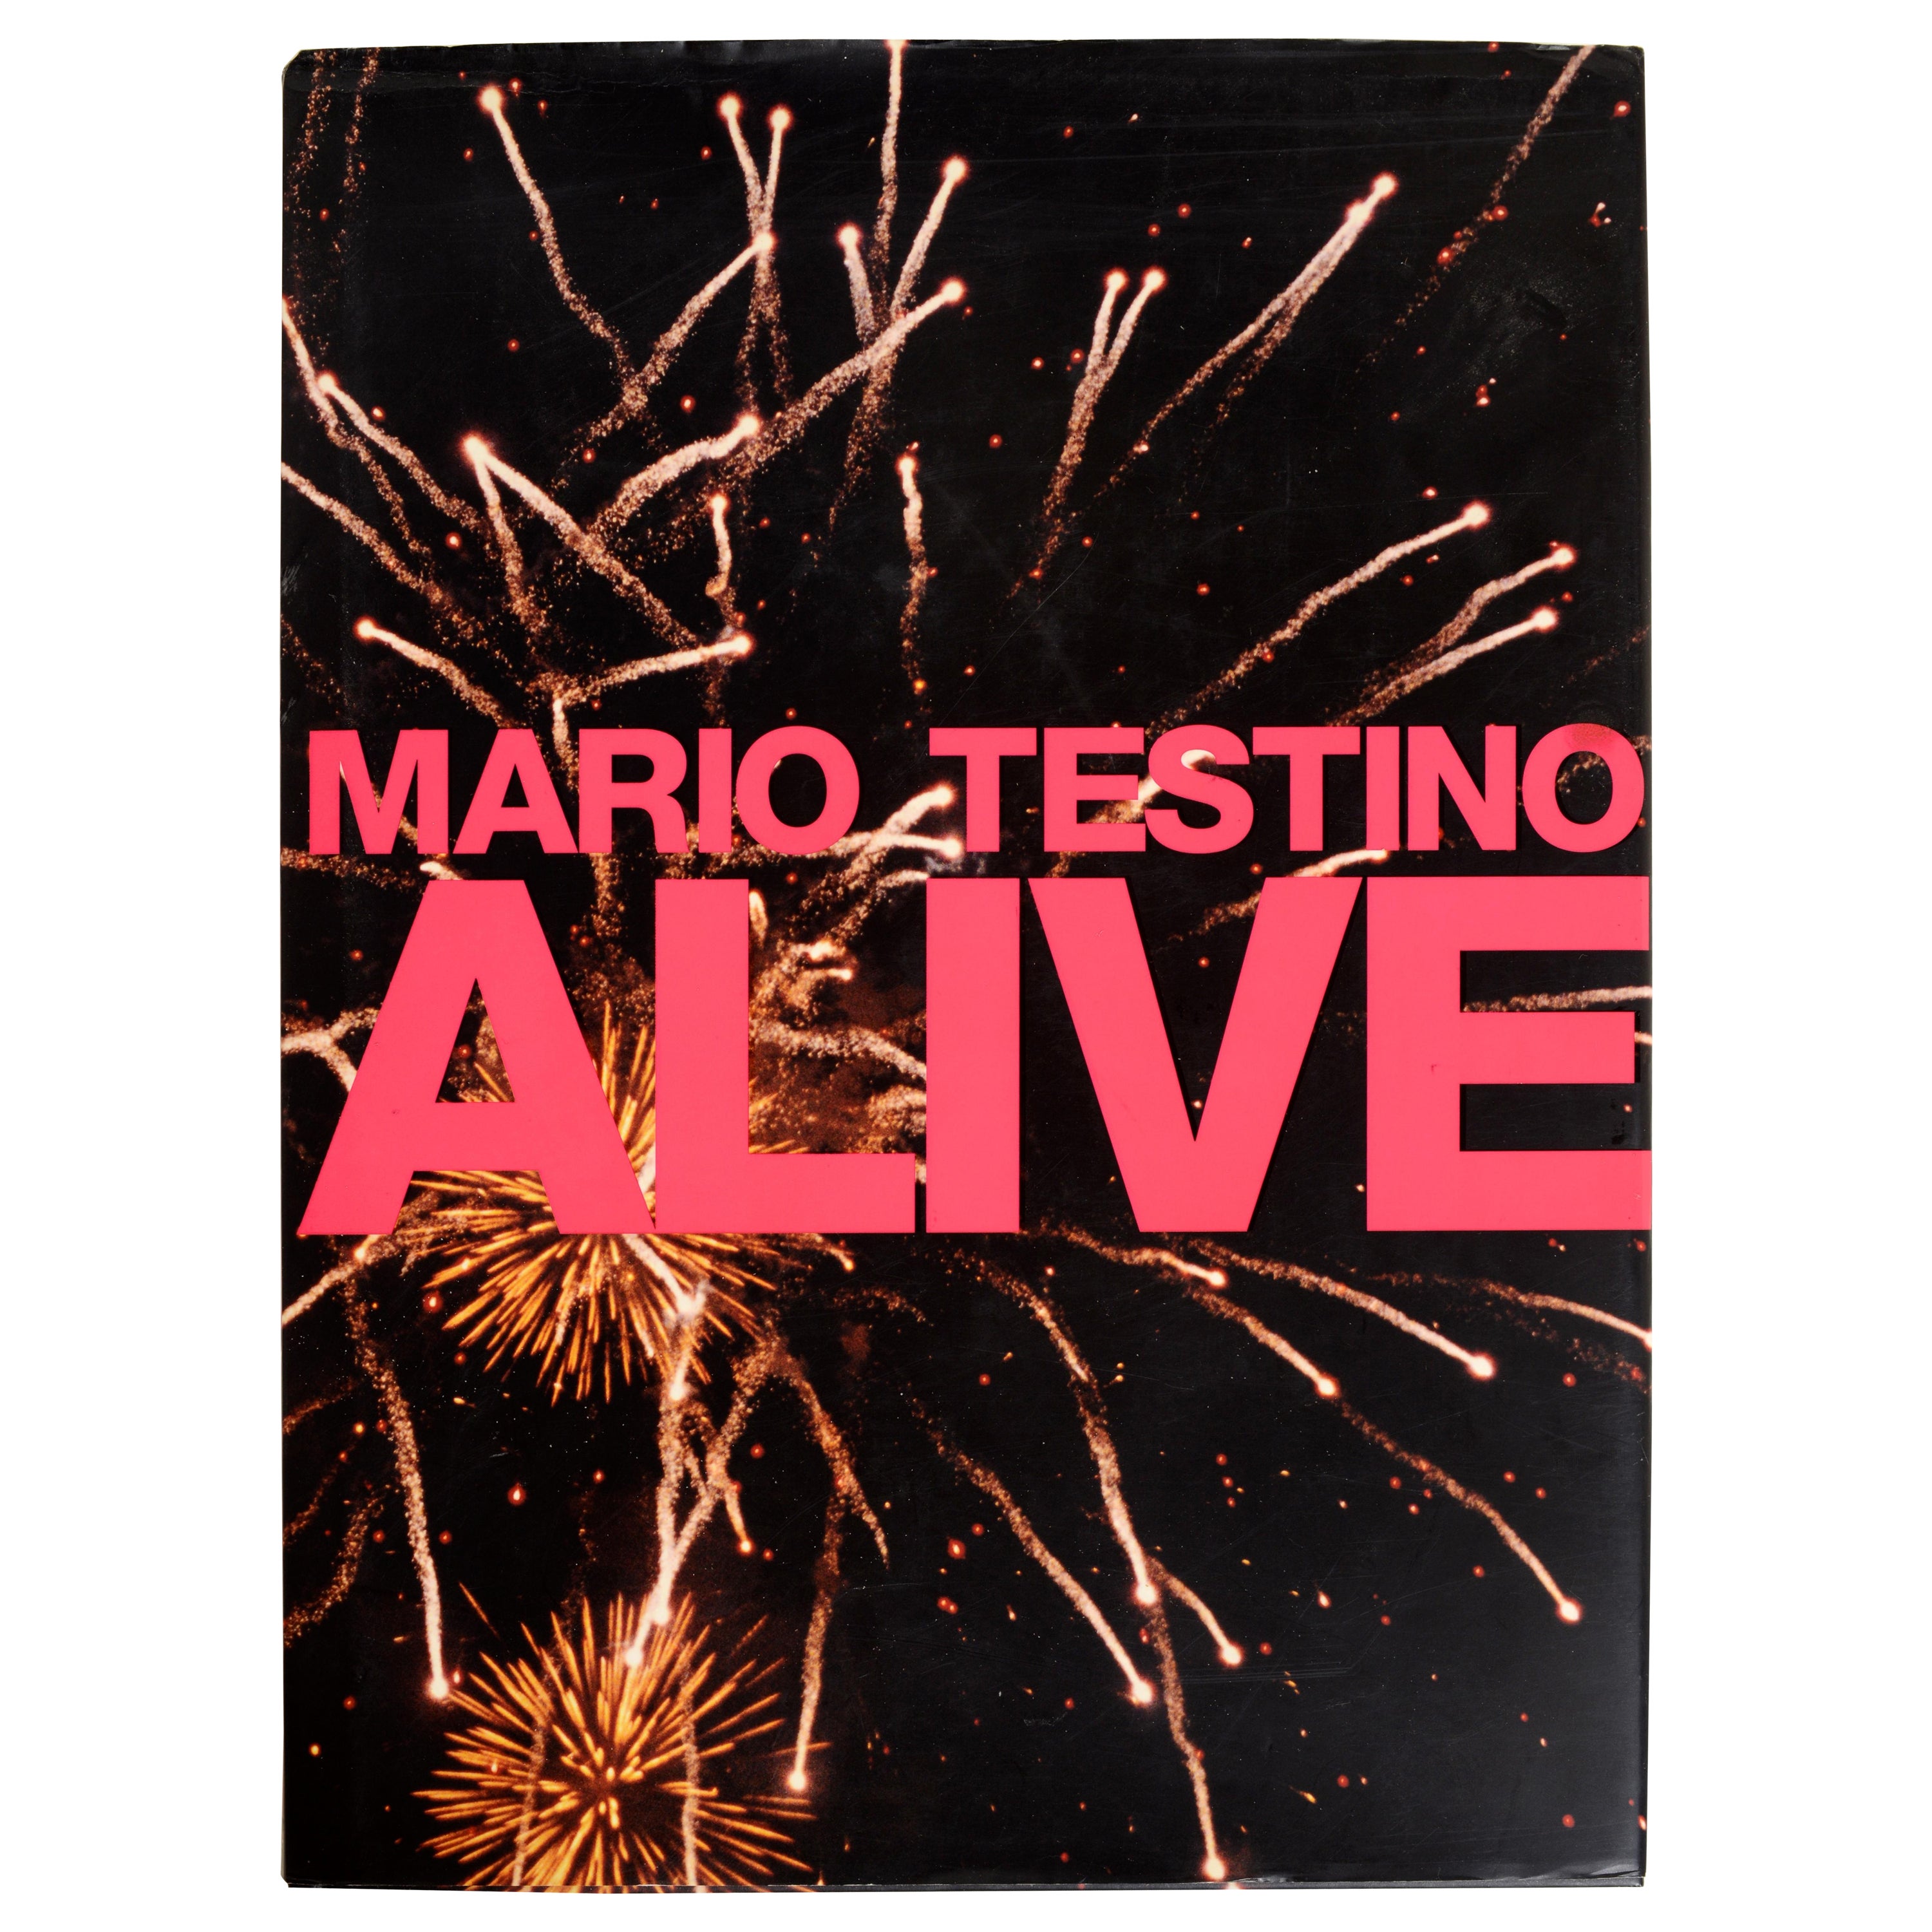 Mario Testino Alive Introduction by Gwenth Paltrow, Stated 1st Ed For Sale